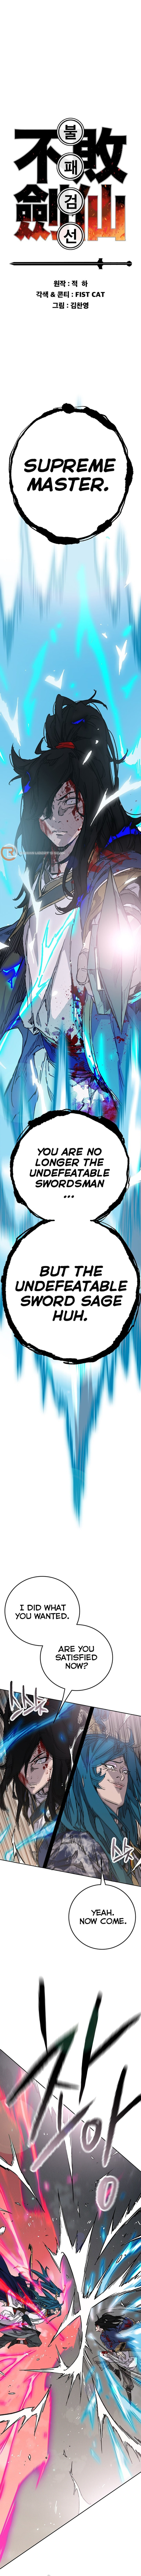 The Undefeatable Swordsman Chapter 203 Page 1